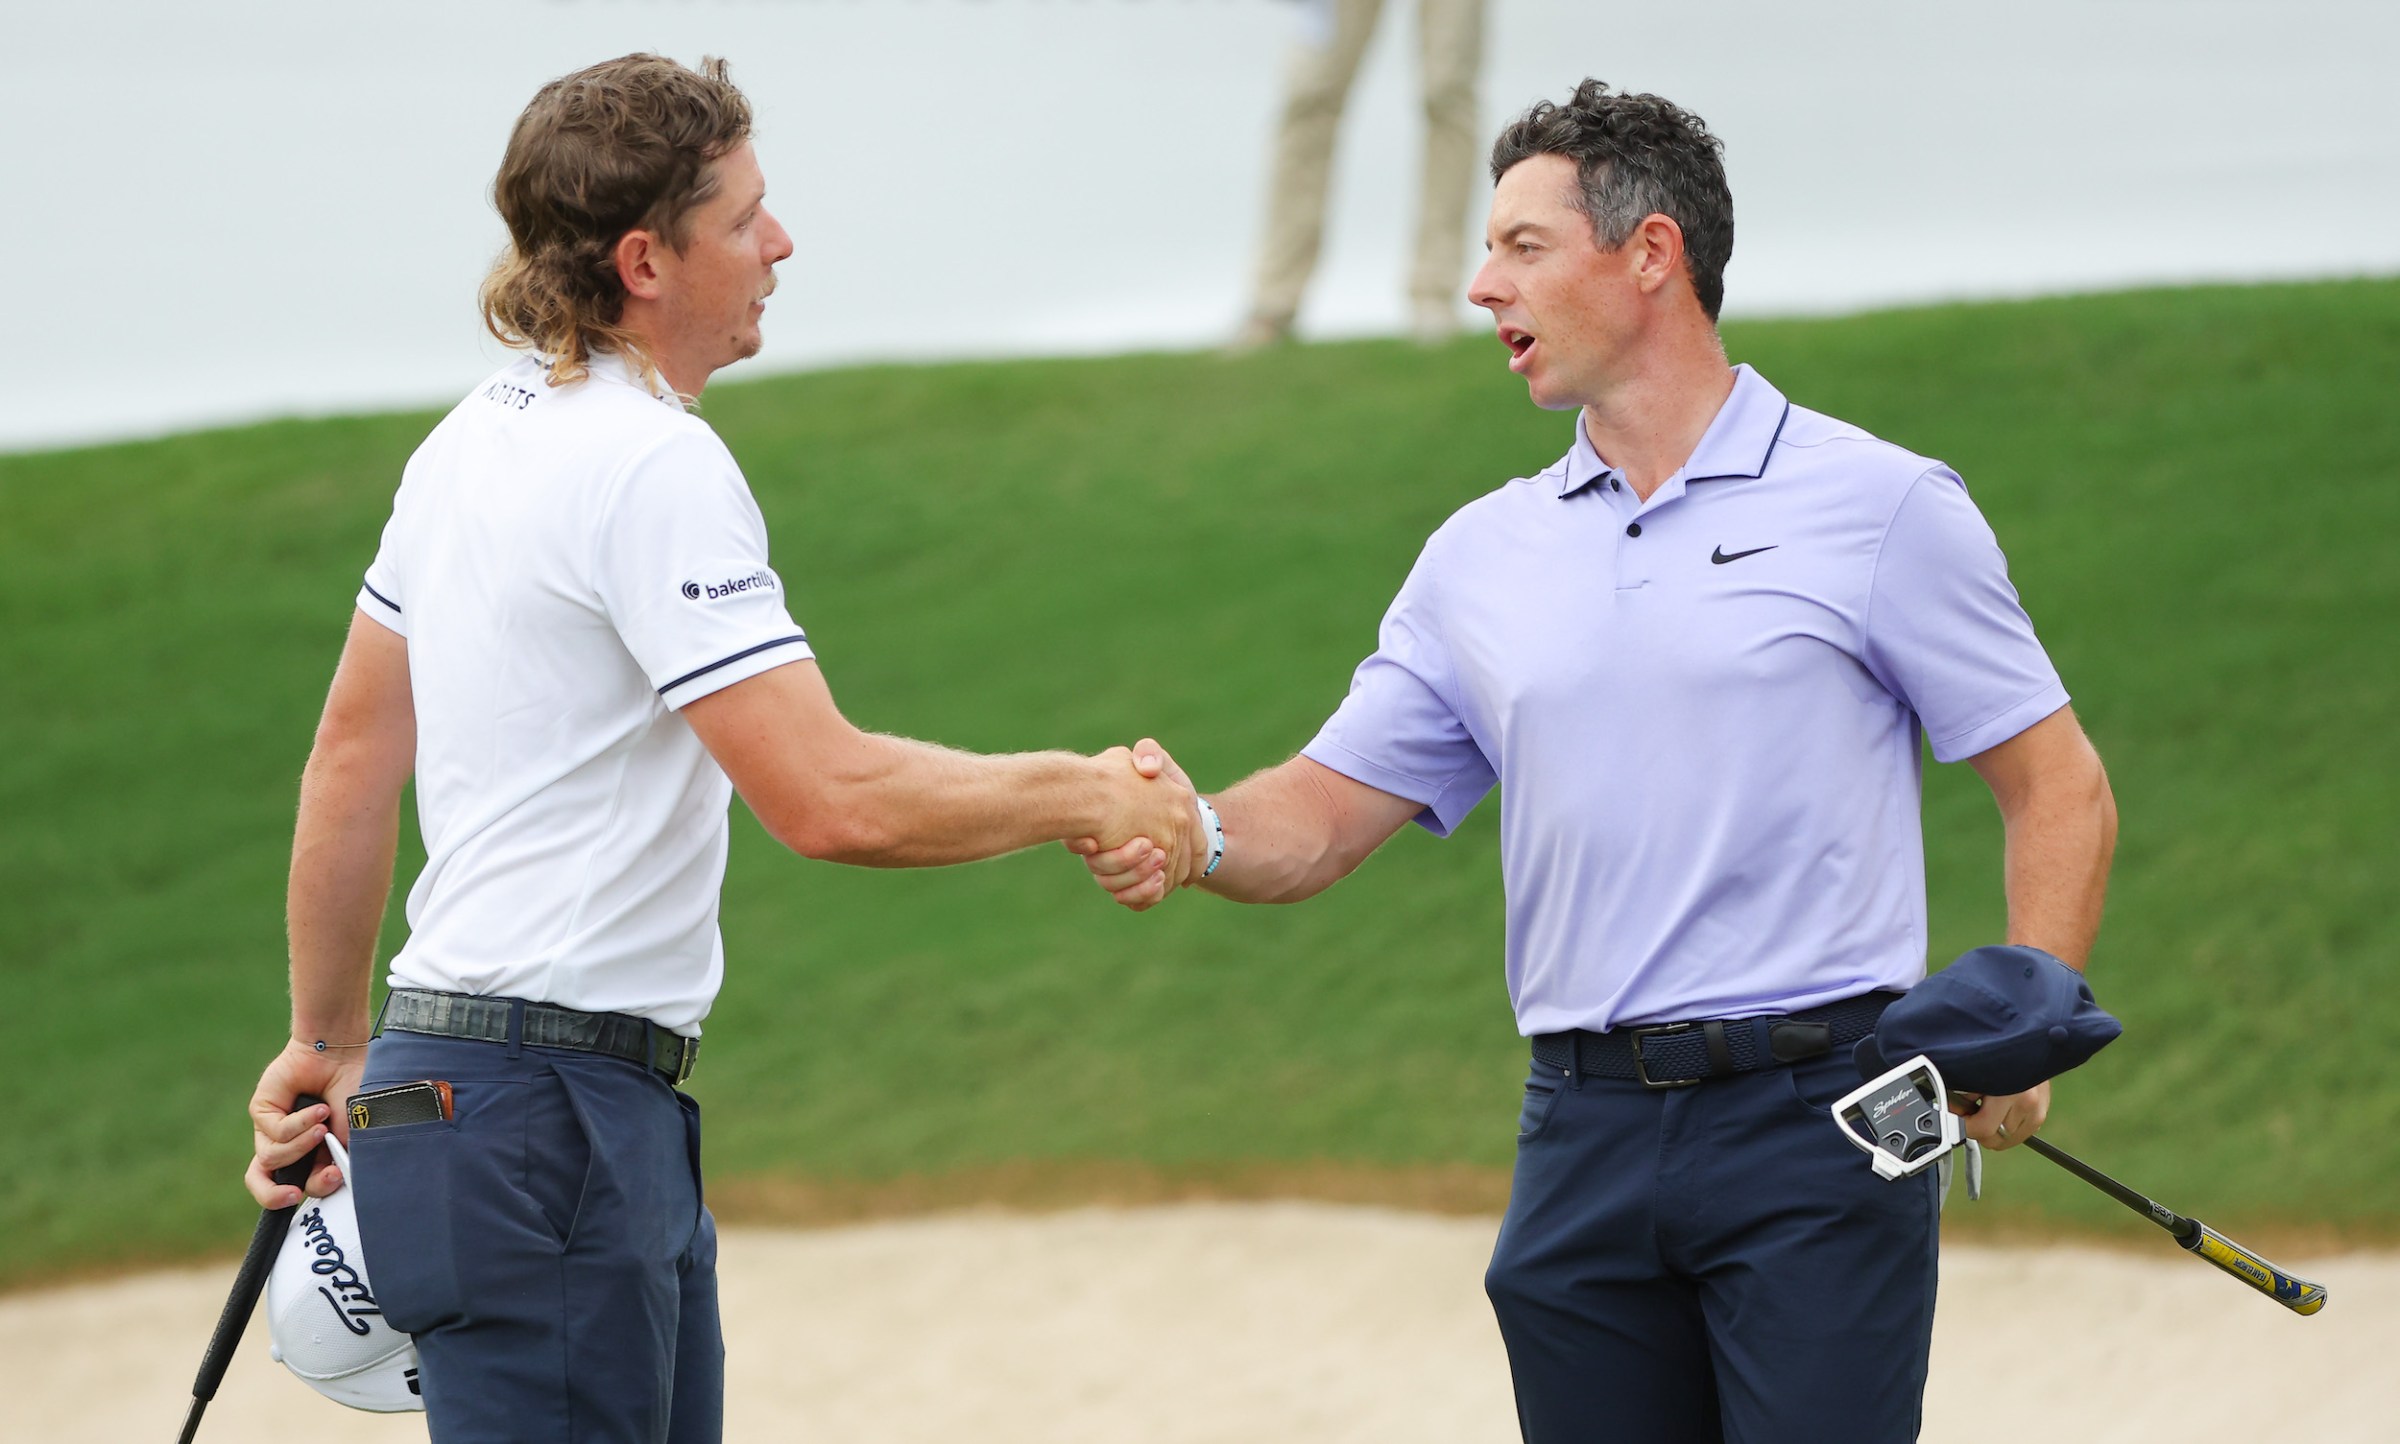 Rory McIlroy shakes hands with Cameron Smith.